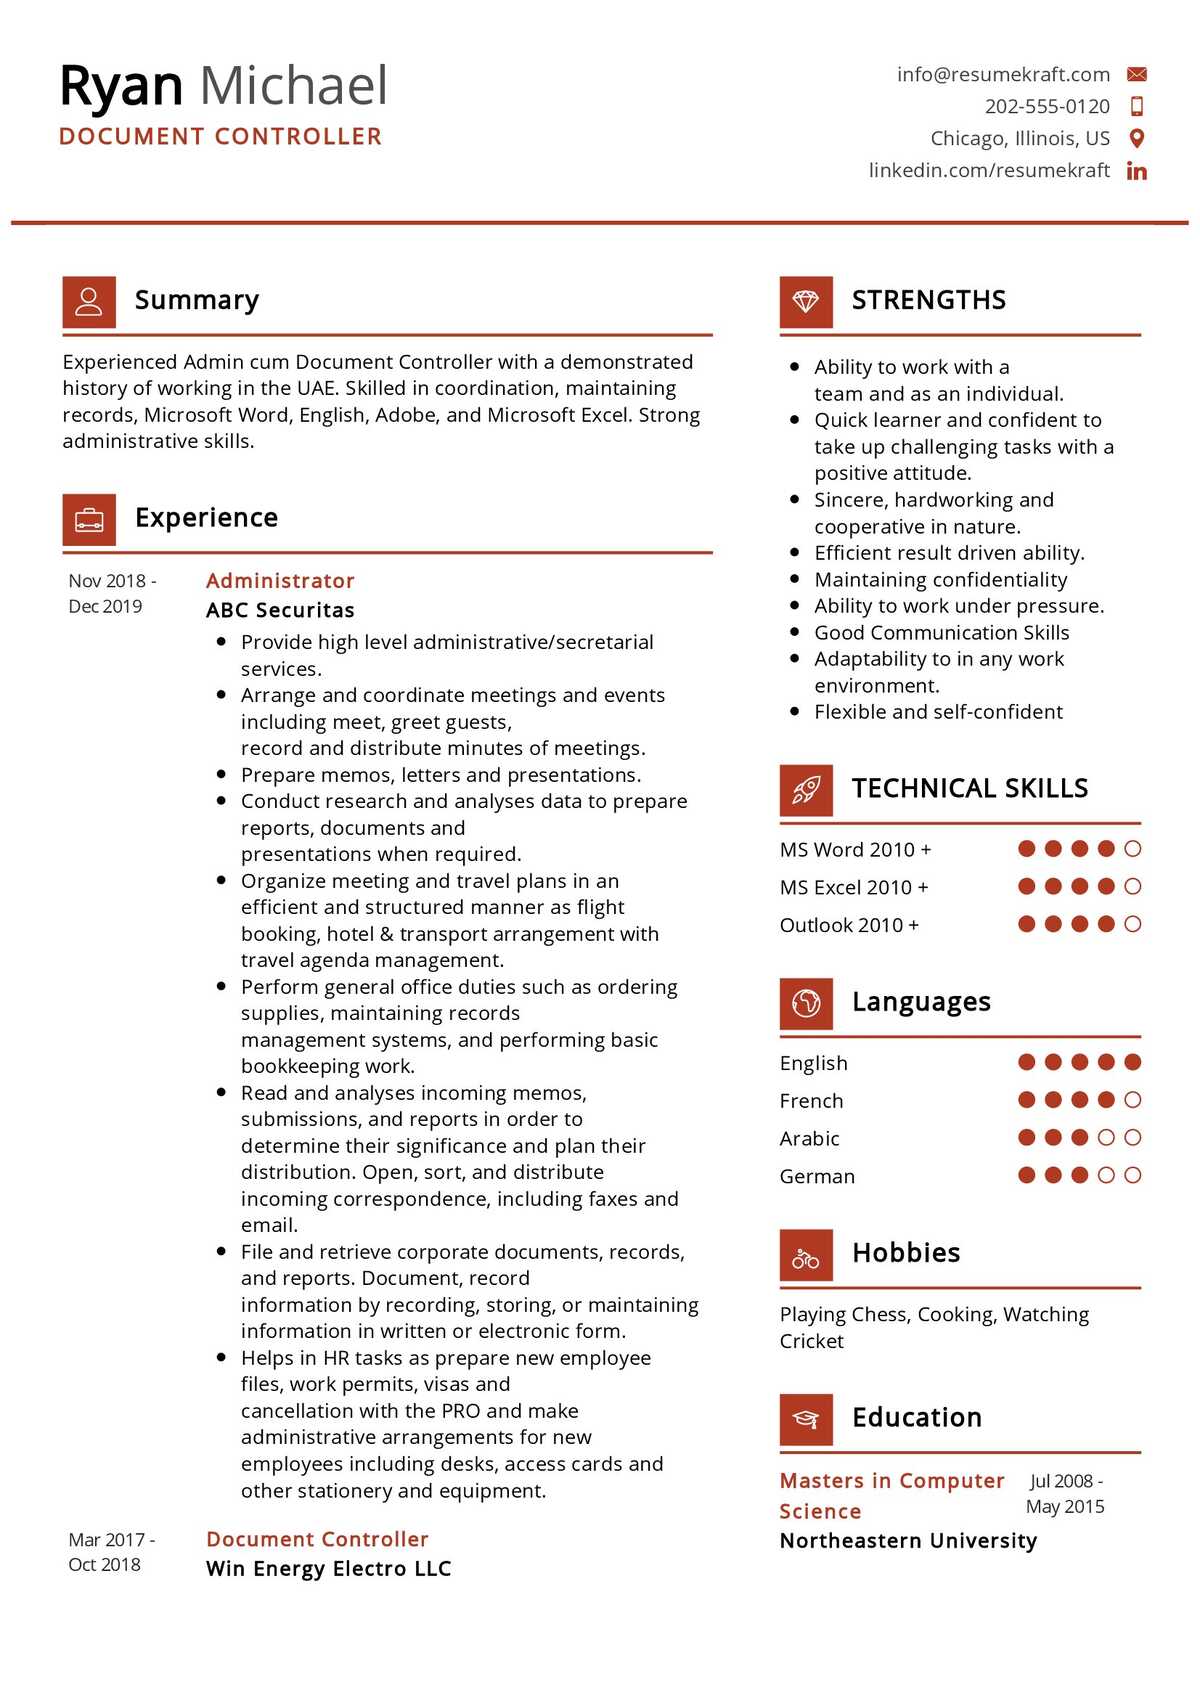 importing a document into a resume template